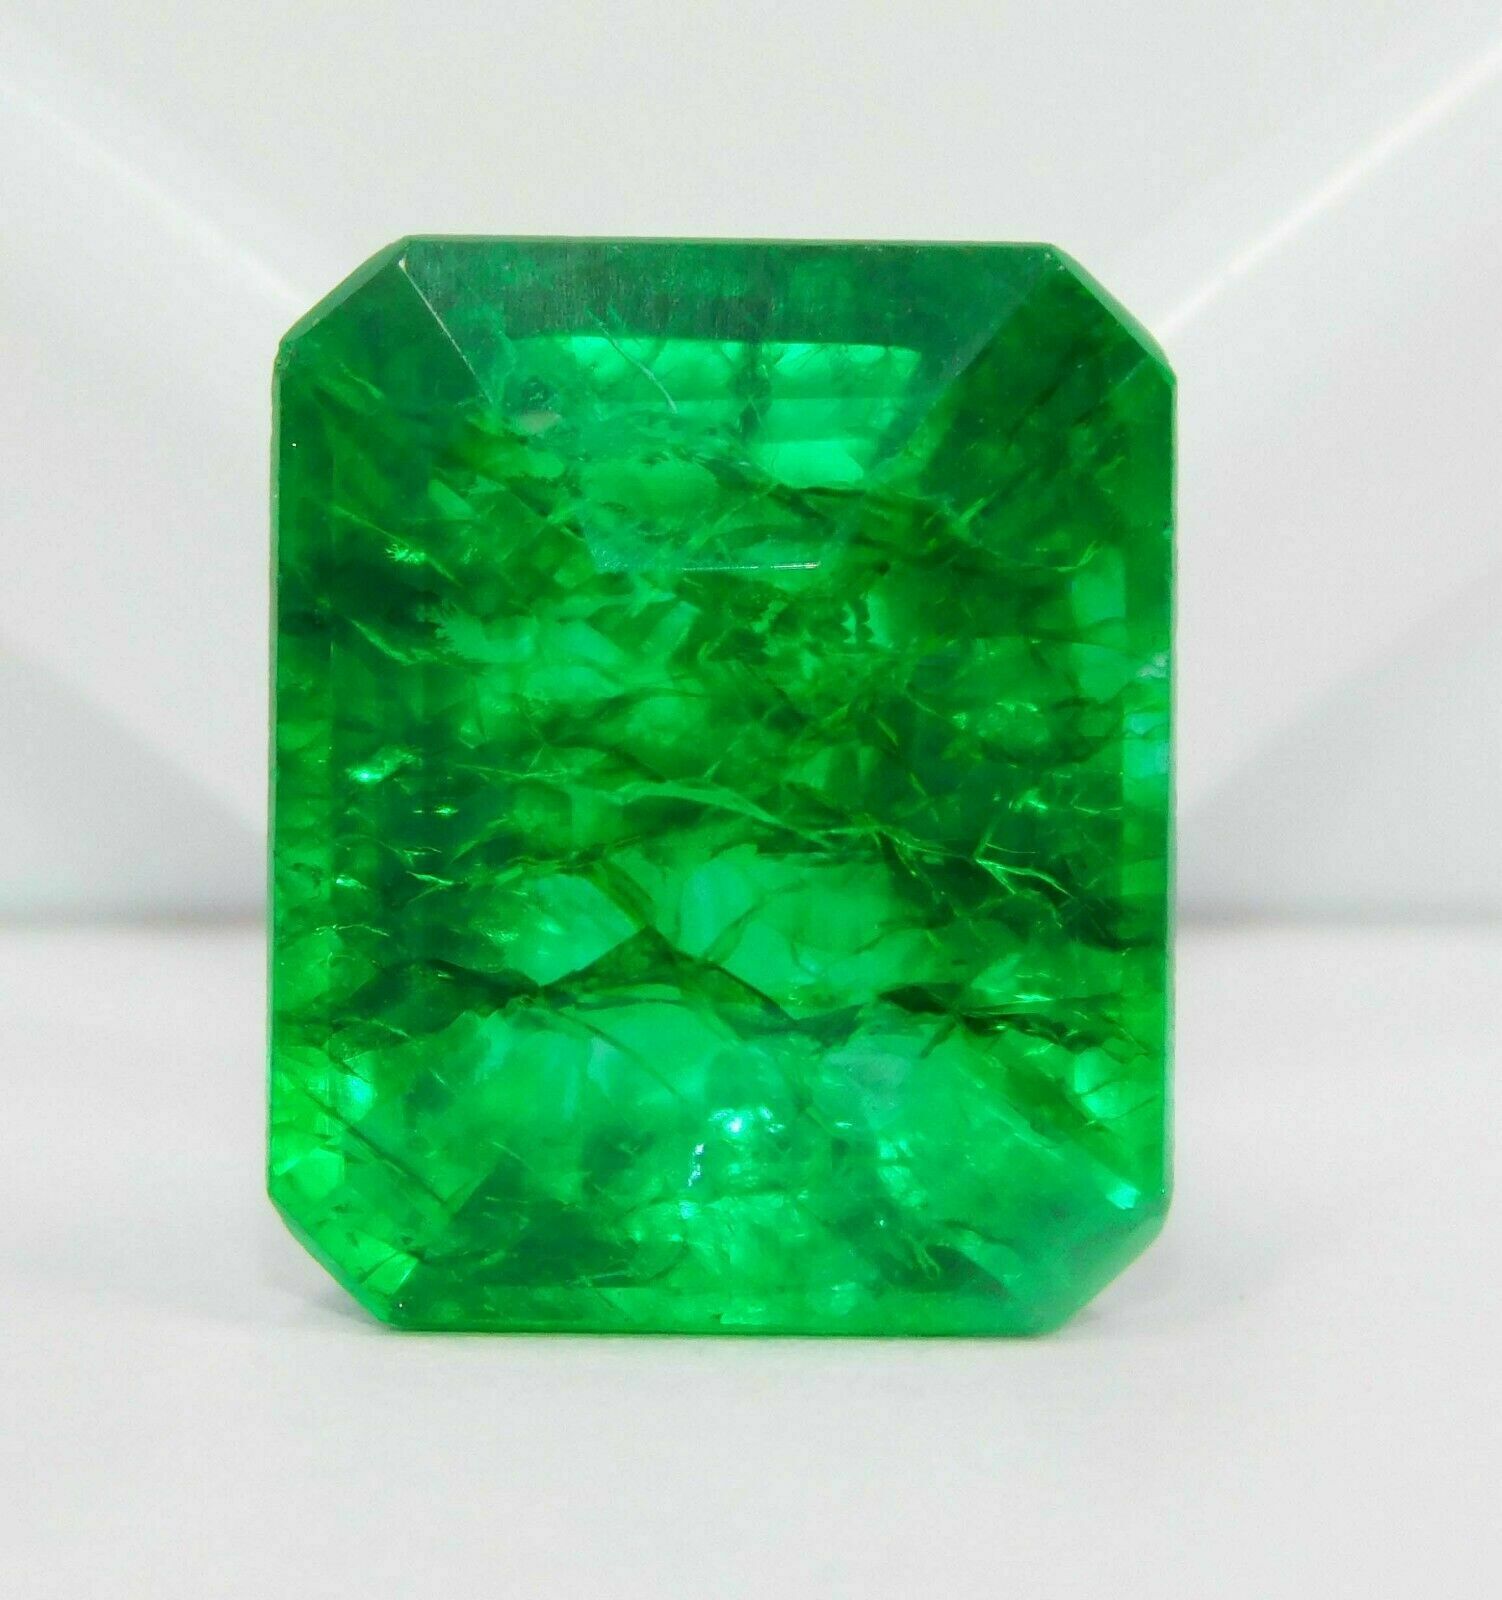 Natural Certified Emerald Shape 9 Ct Green Colombian Emerald Loose Gemstone